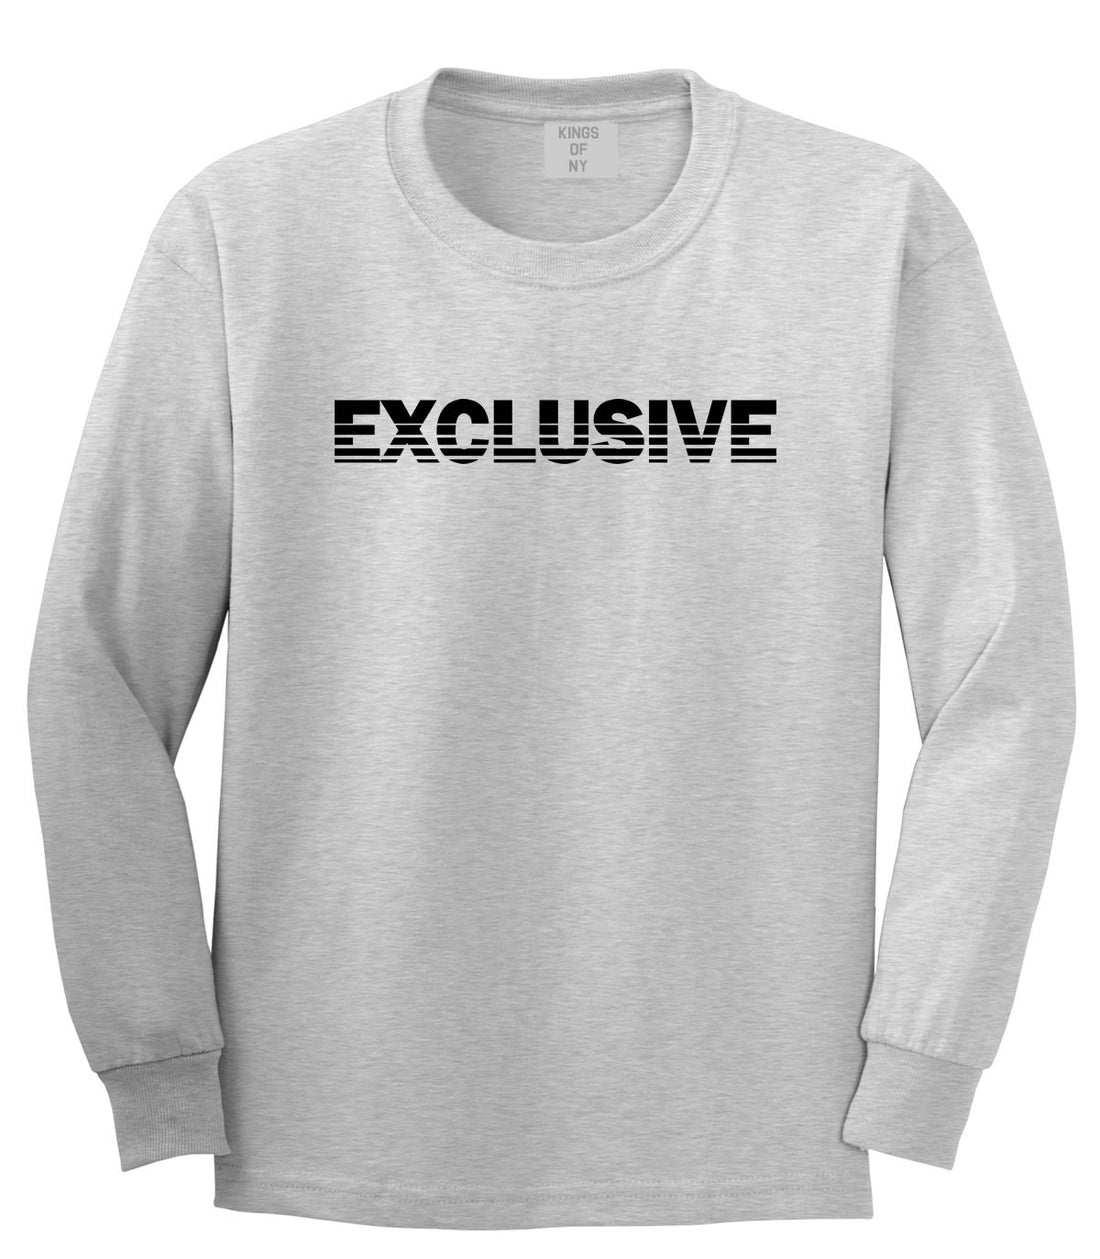 Exclusive Racing Style Long Sleeve T-Shirt in Grey by Kings Of NY